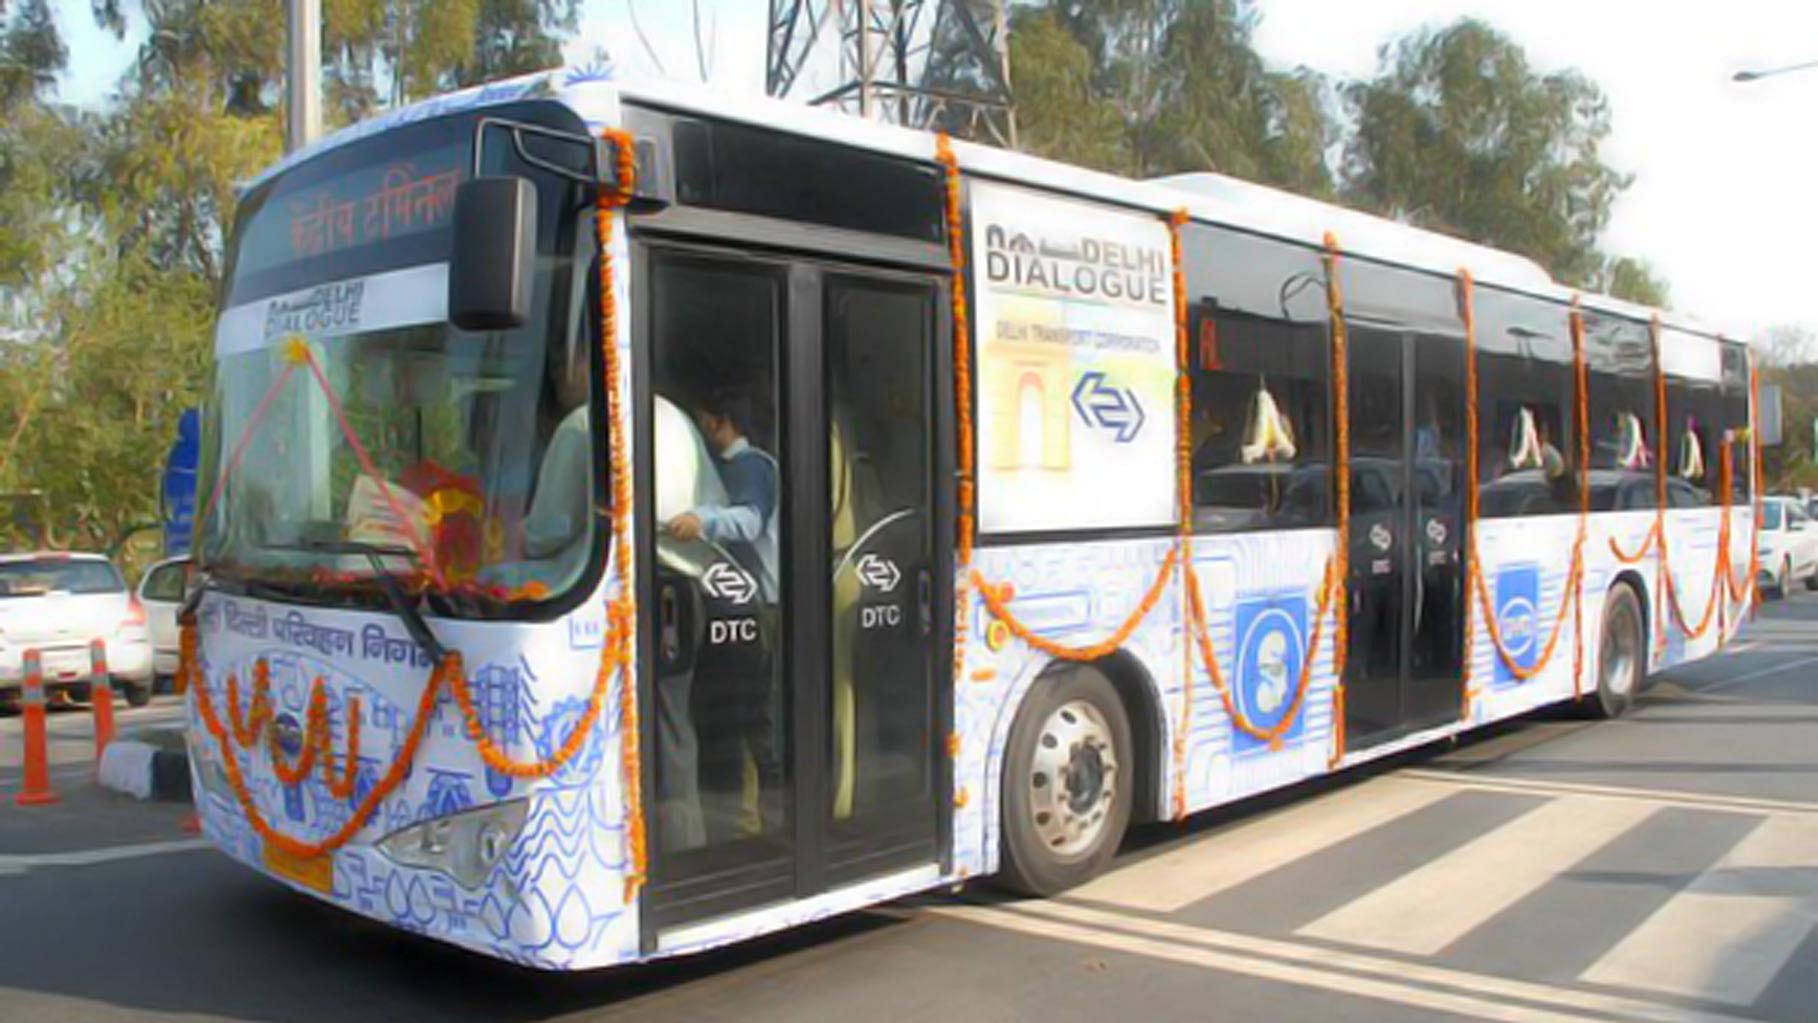 Delhi gets India’s first electric bus. (Photo courtesy: <a href="https://twitter.com/ashu3page/status/707933754413592576/photo/1">Twitter/@ashu3page</a>)